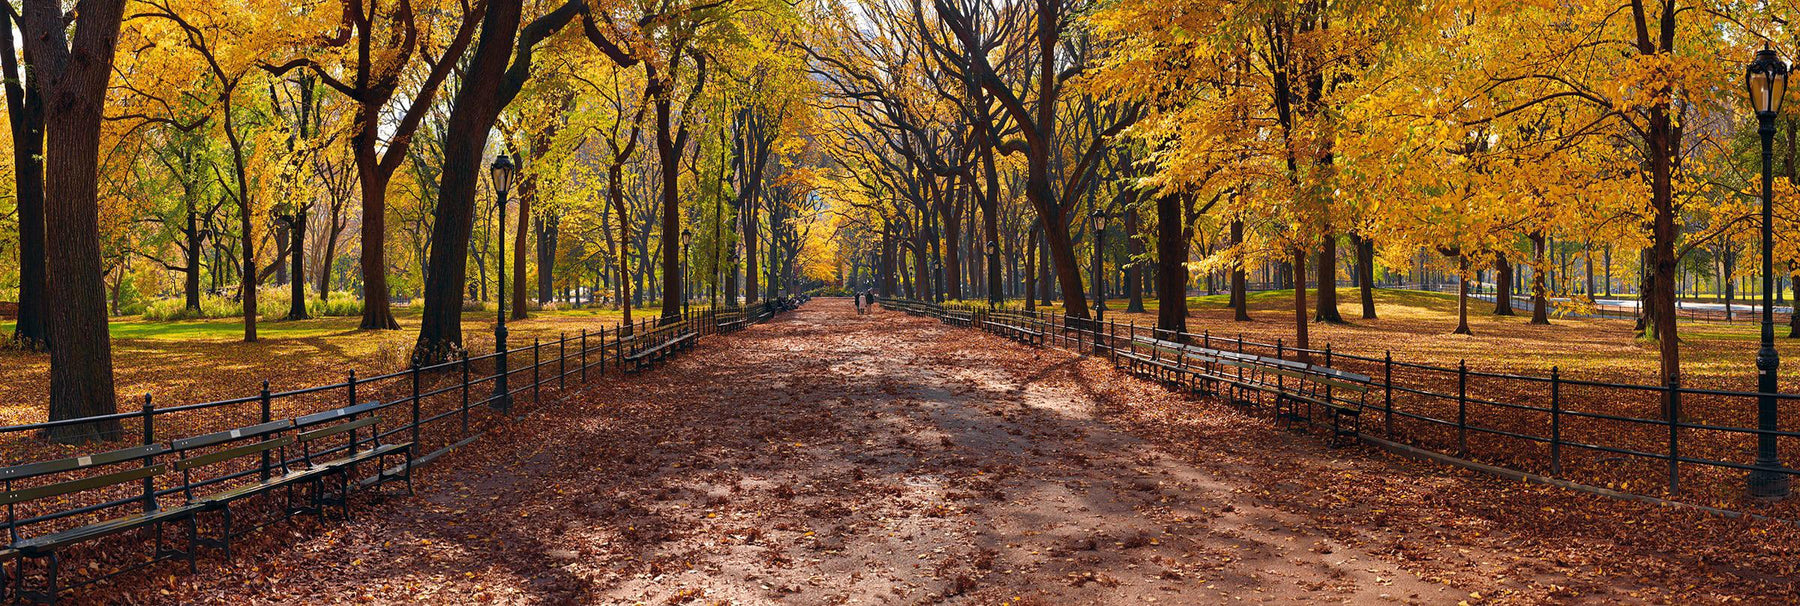 Yellow leaf trees along the iron rod fences and bench filled path of Central Park New York